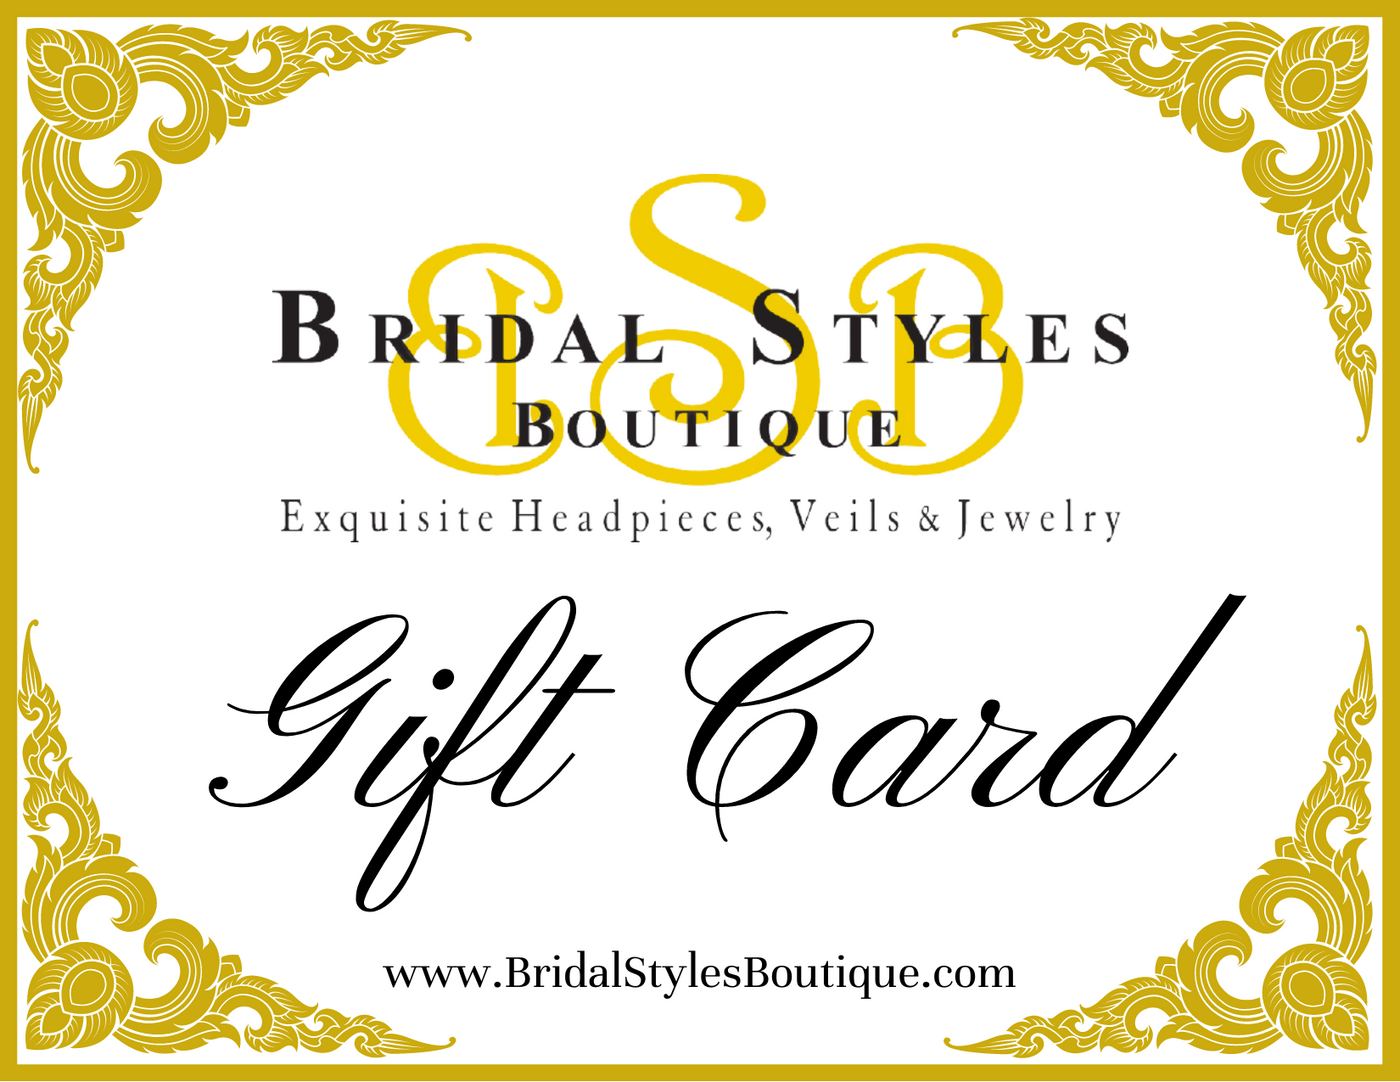 Bridal Styles Boutique Gift Card | Bridal Styles Boutique